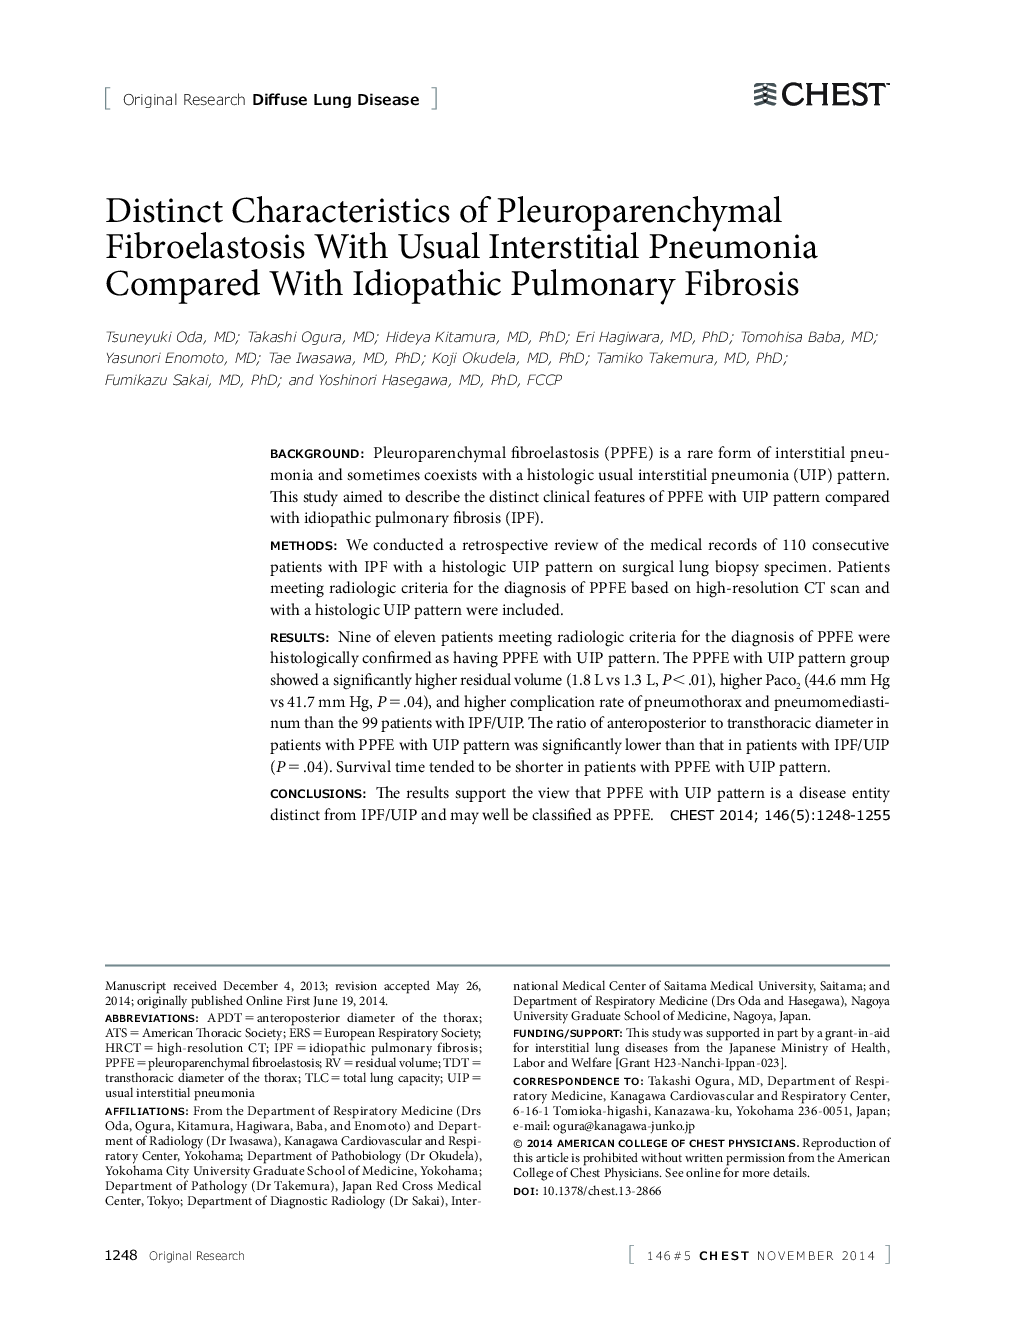 Distinct Characteristics of Pleuroparenchymal Fibroelastosis With Usual Interstitial Pneumonia Compared With Idiopathic Pulmonary Fibrosis